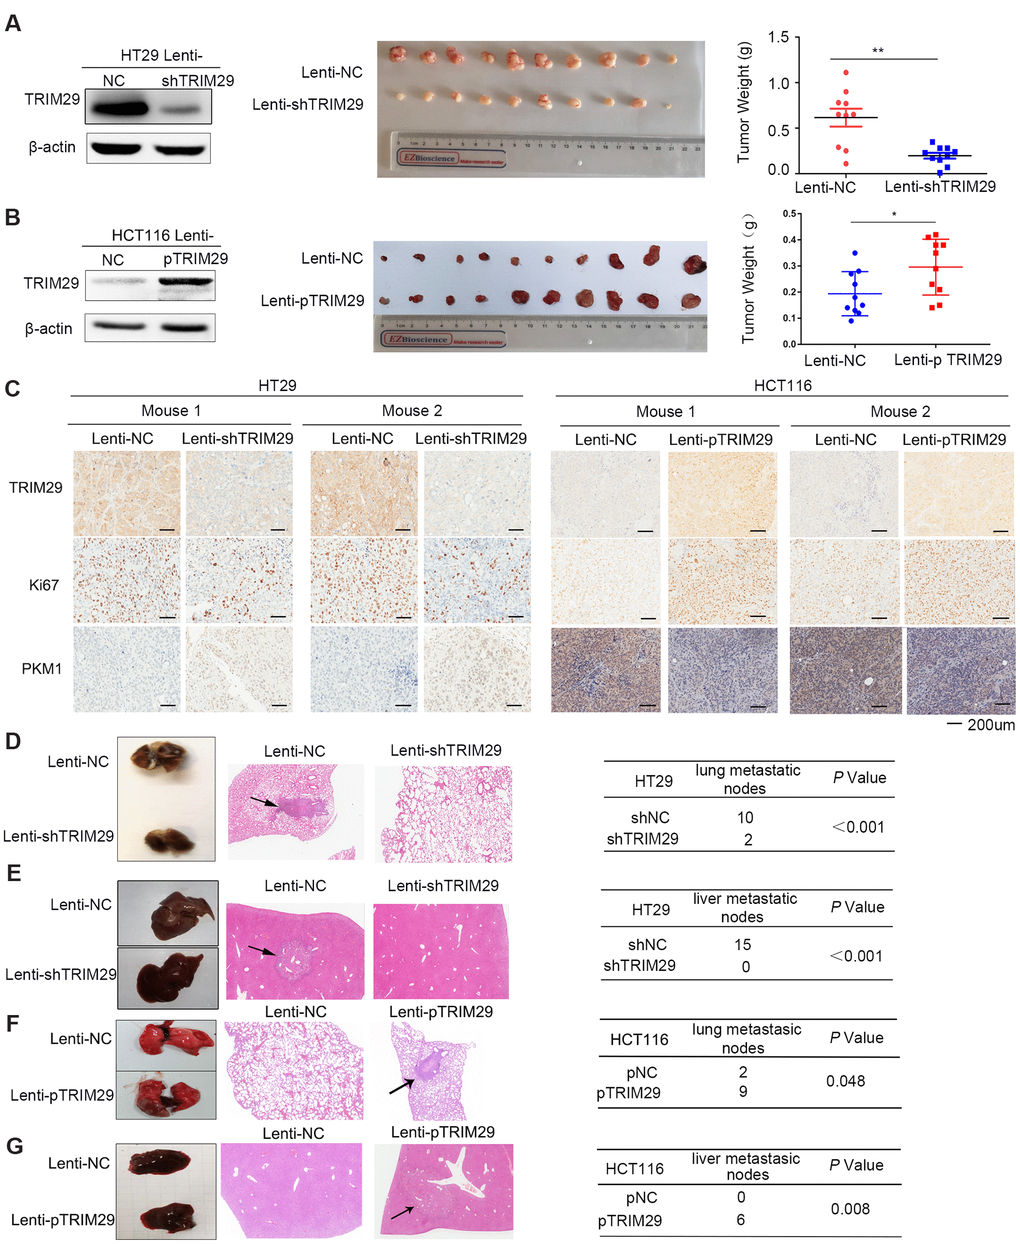 TRIM29 promotes the growth and metastasis of CRC in vivo. (A, B) Mice were subcutaneously injected with HT29 cells (A) or HCT116 cells (B) in both side of the top back (lenti-NC in the left and lenti-shTRIM29/lenti-pTRIM29 in the right). Tumor weight of both lenti-NC and lenti-shTRIM29/lenti-pTRIM29 cell-derived tumors in nude mice was measured two weeks later (n=10). (C) Representative IHC staining of TRIM29, Ki67 and PKM1 in two mice with HT29 and HCT116 xenografts derived from lenti-NC and lenti-shTRIM29/lenti-pTRIM29 cells. (D–G) Mice were injected with HT29 or HCT116 cells (2*106 cells in 0.1 ml) via tail vein; lenti-NC group (n=5), lenti-shTRIM29/lenti-pTRIM29 group (n=5). (D, F) Rate of lung metastasis after tail injection. (E, G) Rate of liver metastasis after tail injection. The statistical analysis was performed using two-tailed Student’s t-test. *P P P 